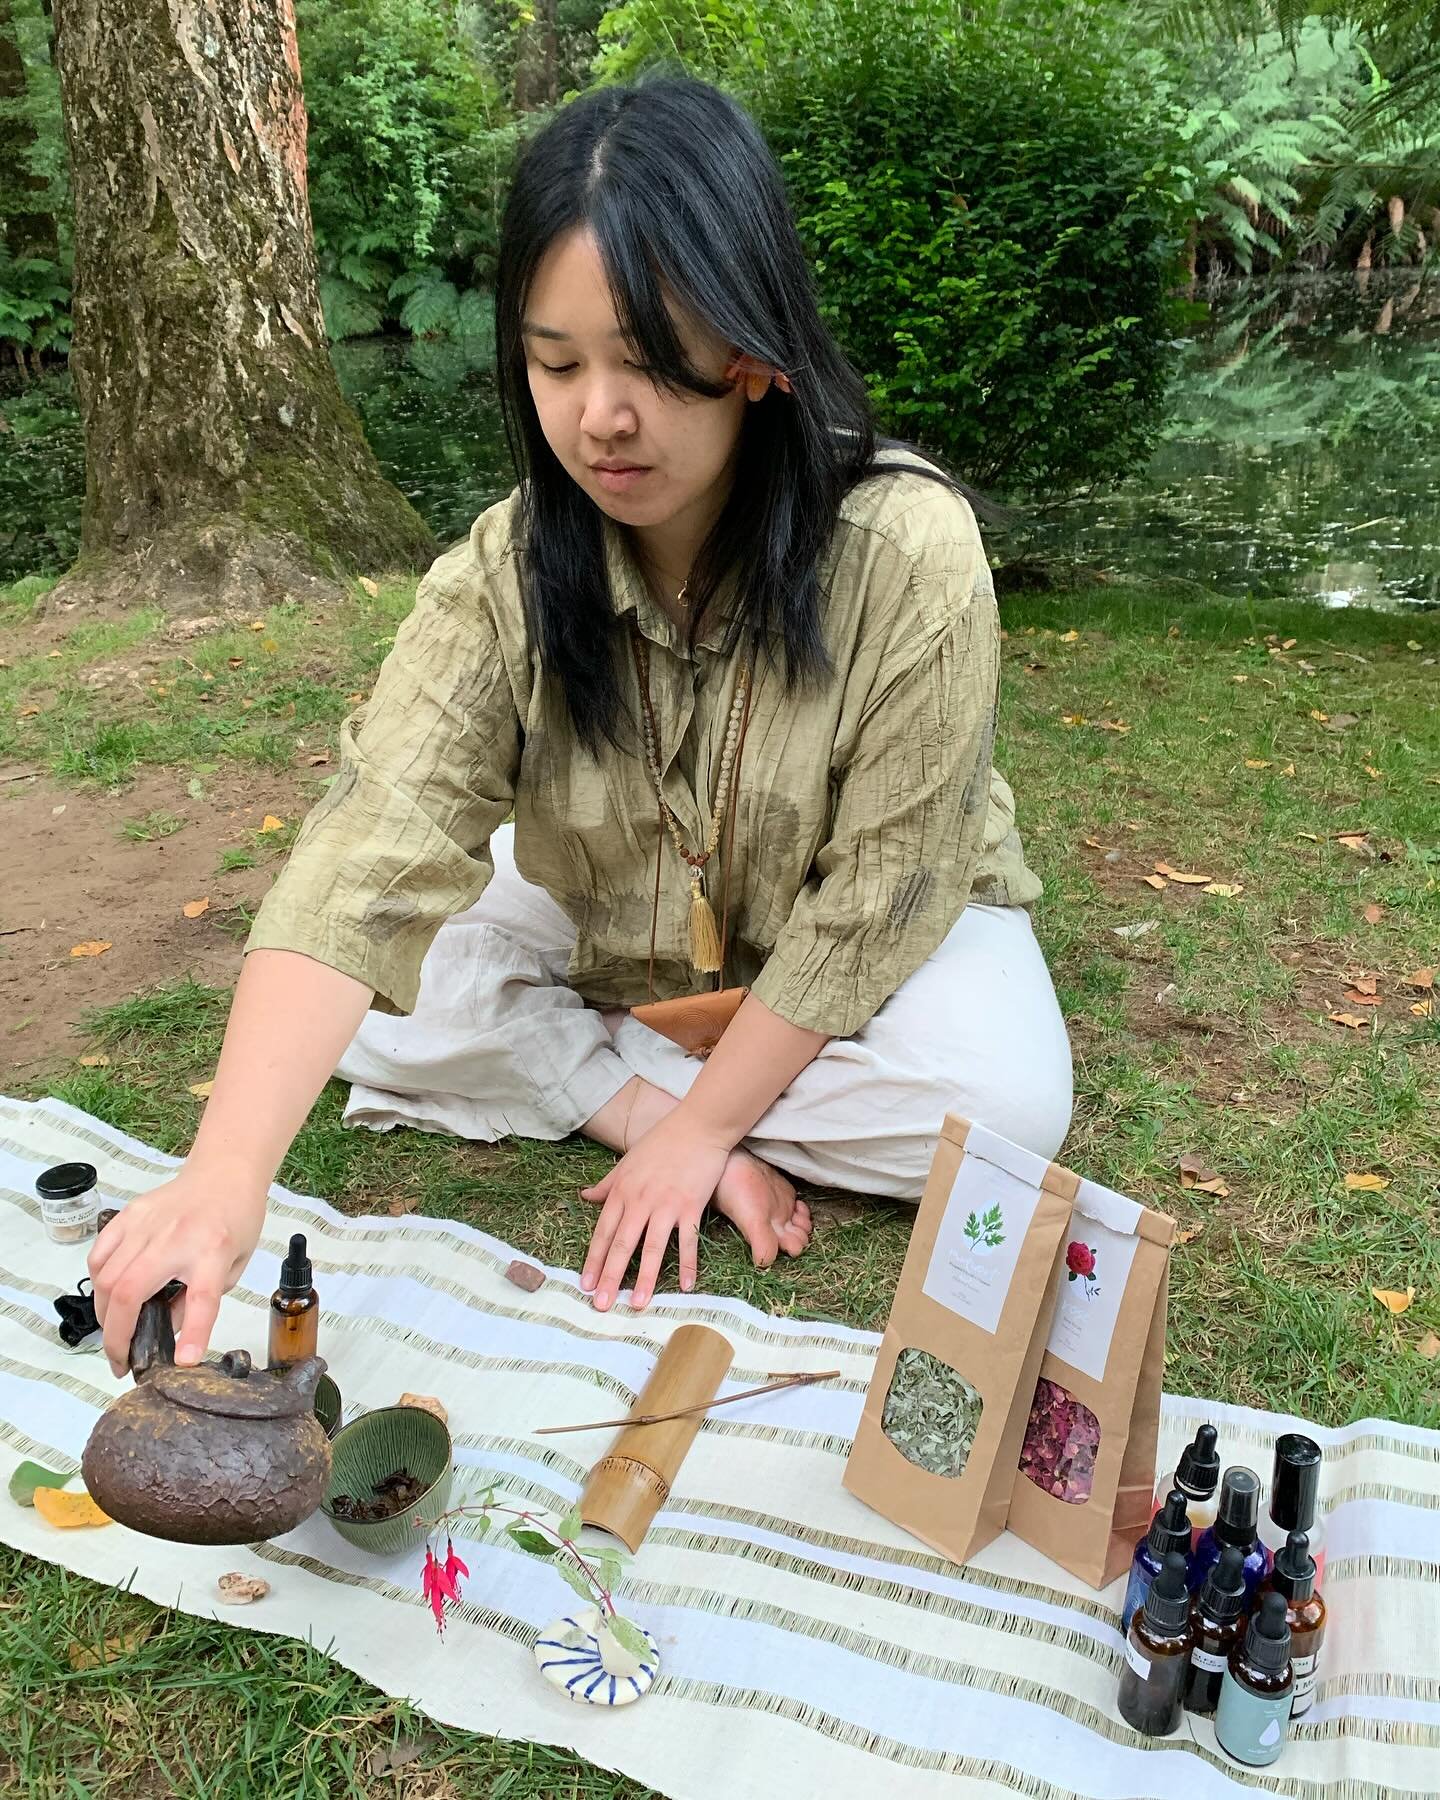 🎟️Tickets selling fast 🐥 Early bird ends 11:30pm tonight!!

Would you like sacred space held for your Inner Child&rsquo;s healing with

🌱Rose tea medicine
🌱flower essences
🌱plant spirit work
🌱meditation energetics
🌱sound healing

Reconnect to 